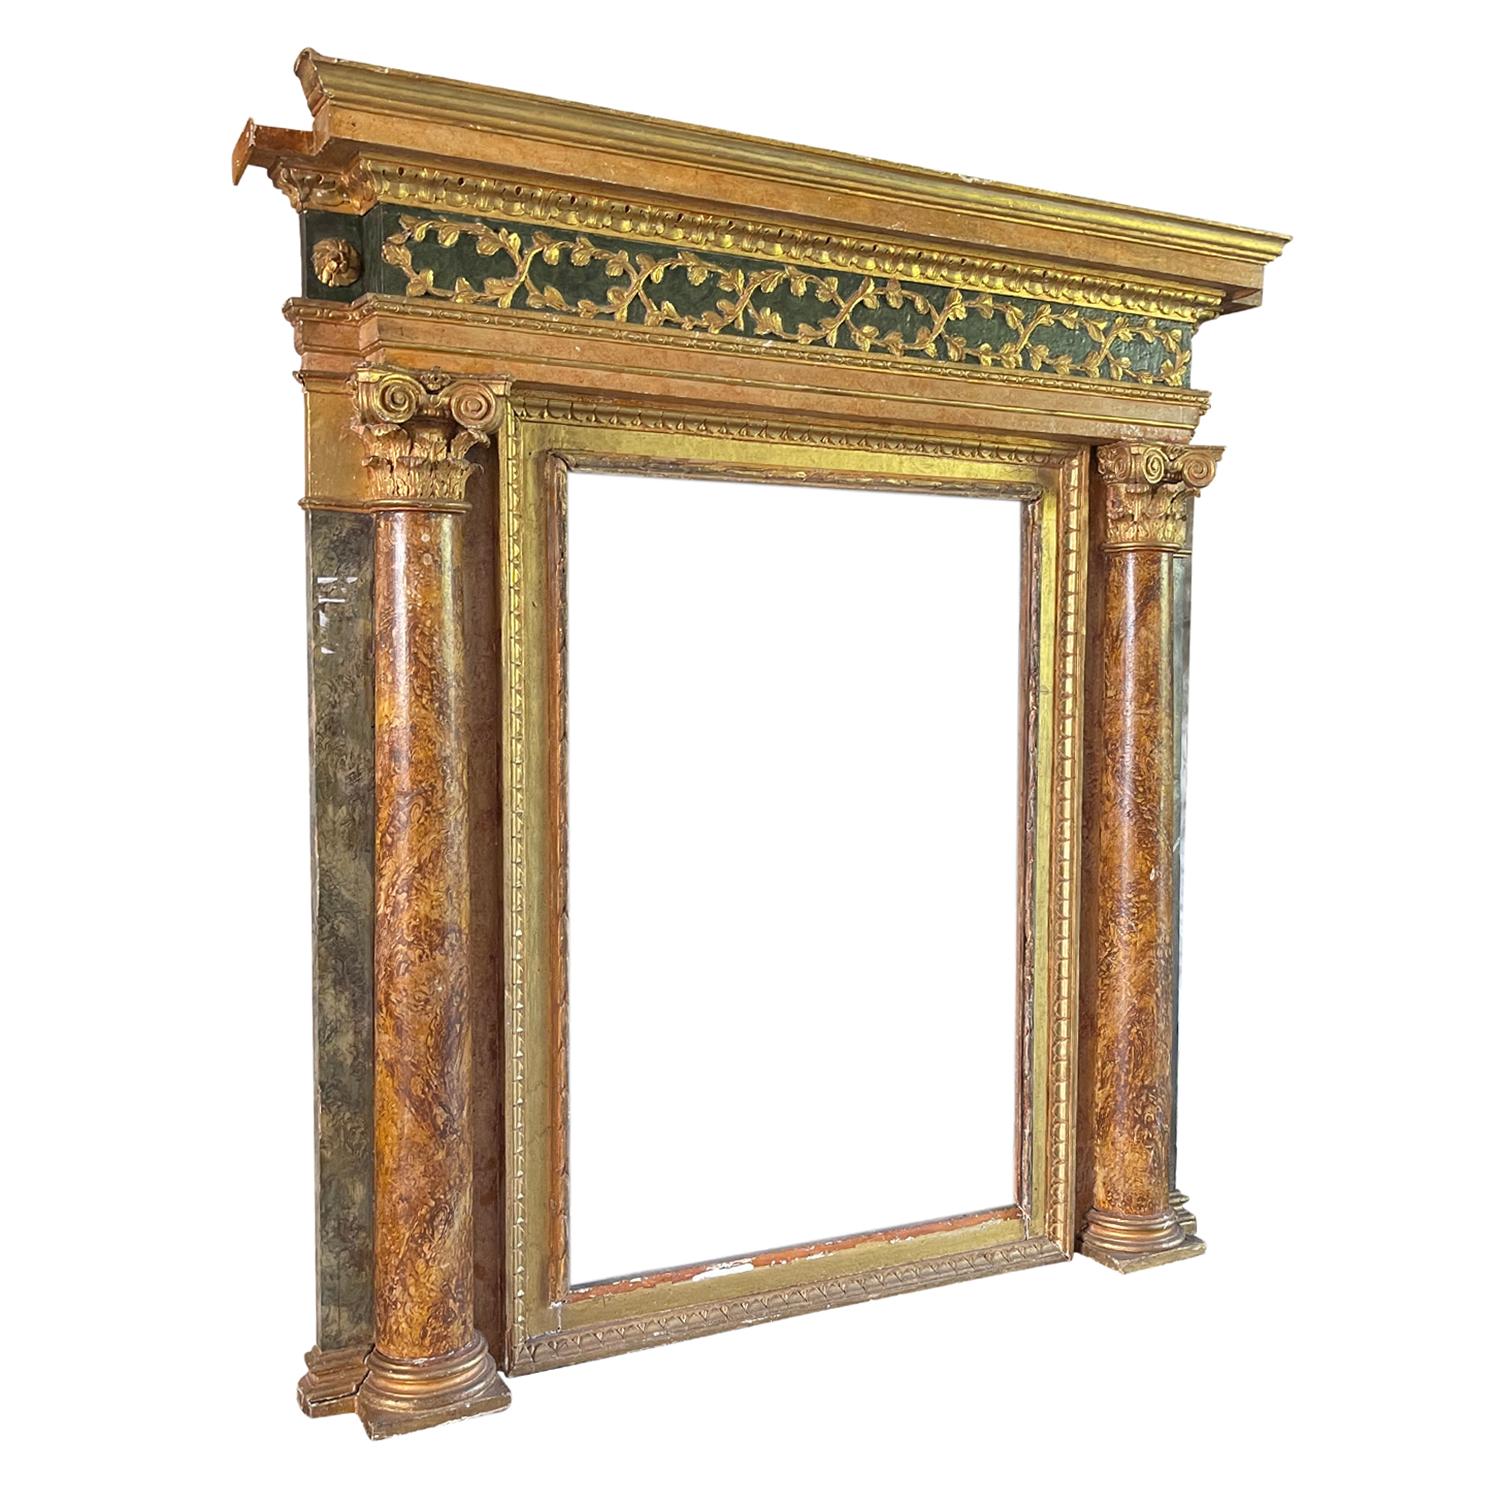 An Italian surround or formal fireplace mantel from an antique villa near Verona. The flanking superbly carved wooden Ionic columns have been finished with a Venetian marble paint. The entire interior gilded dentil frame is set onto a double frame.